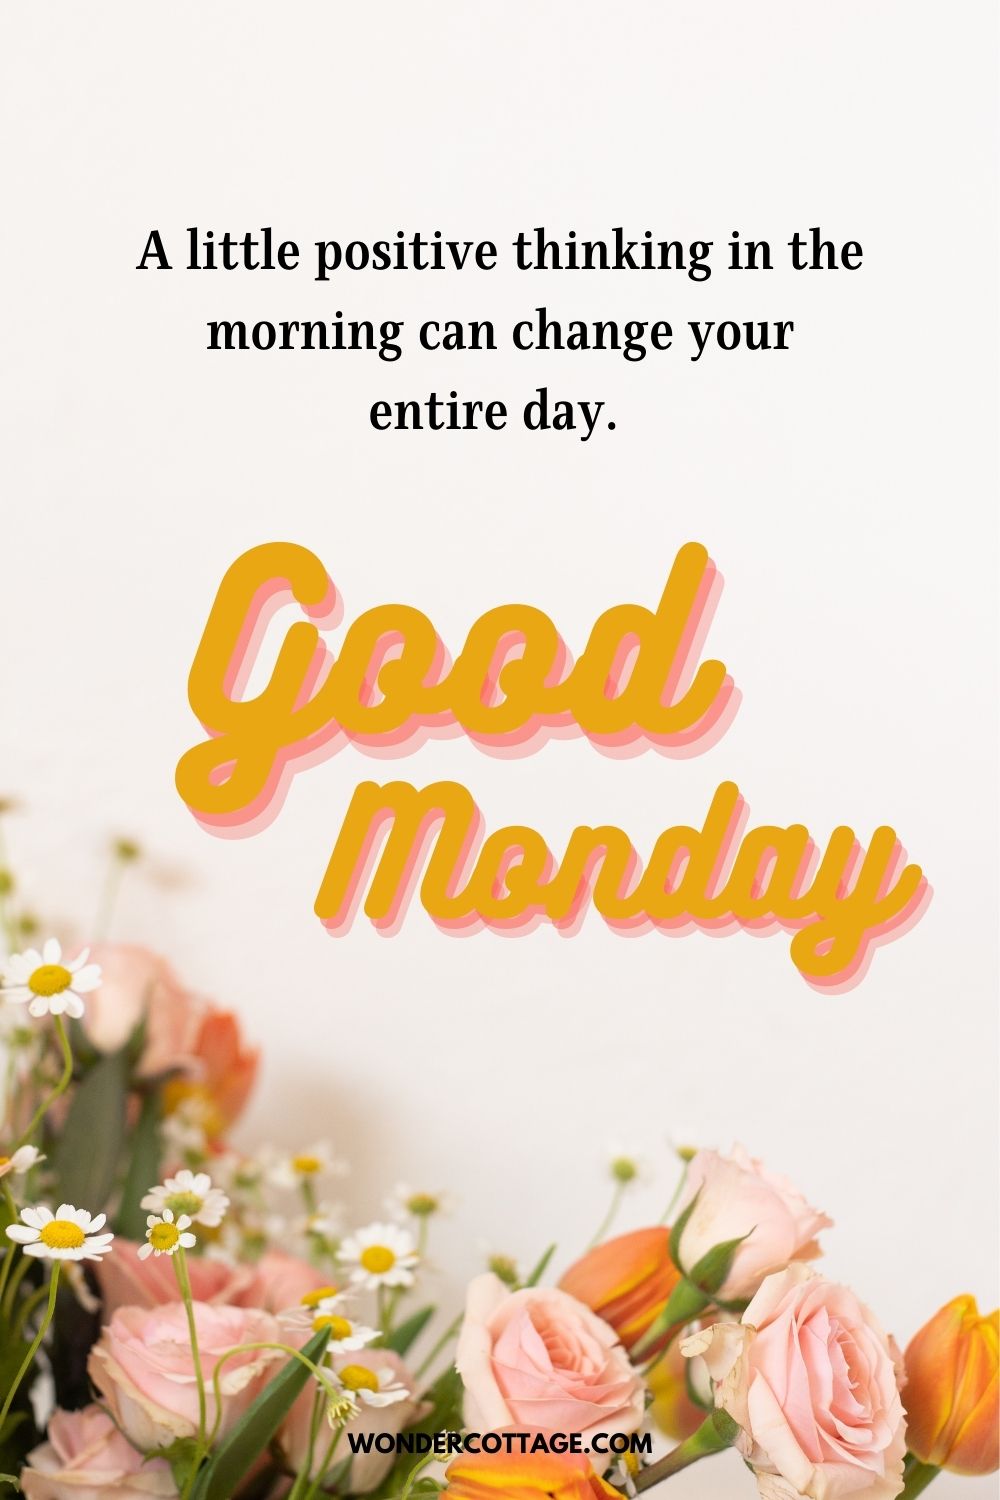 A little positive thinking in the morning can change your entire day. Good Monday!